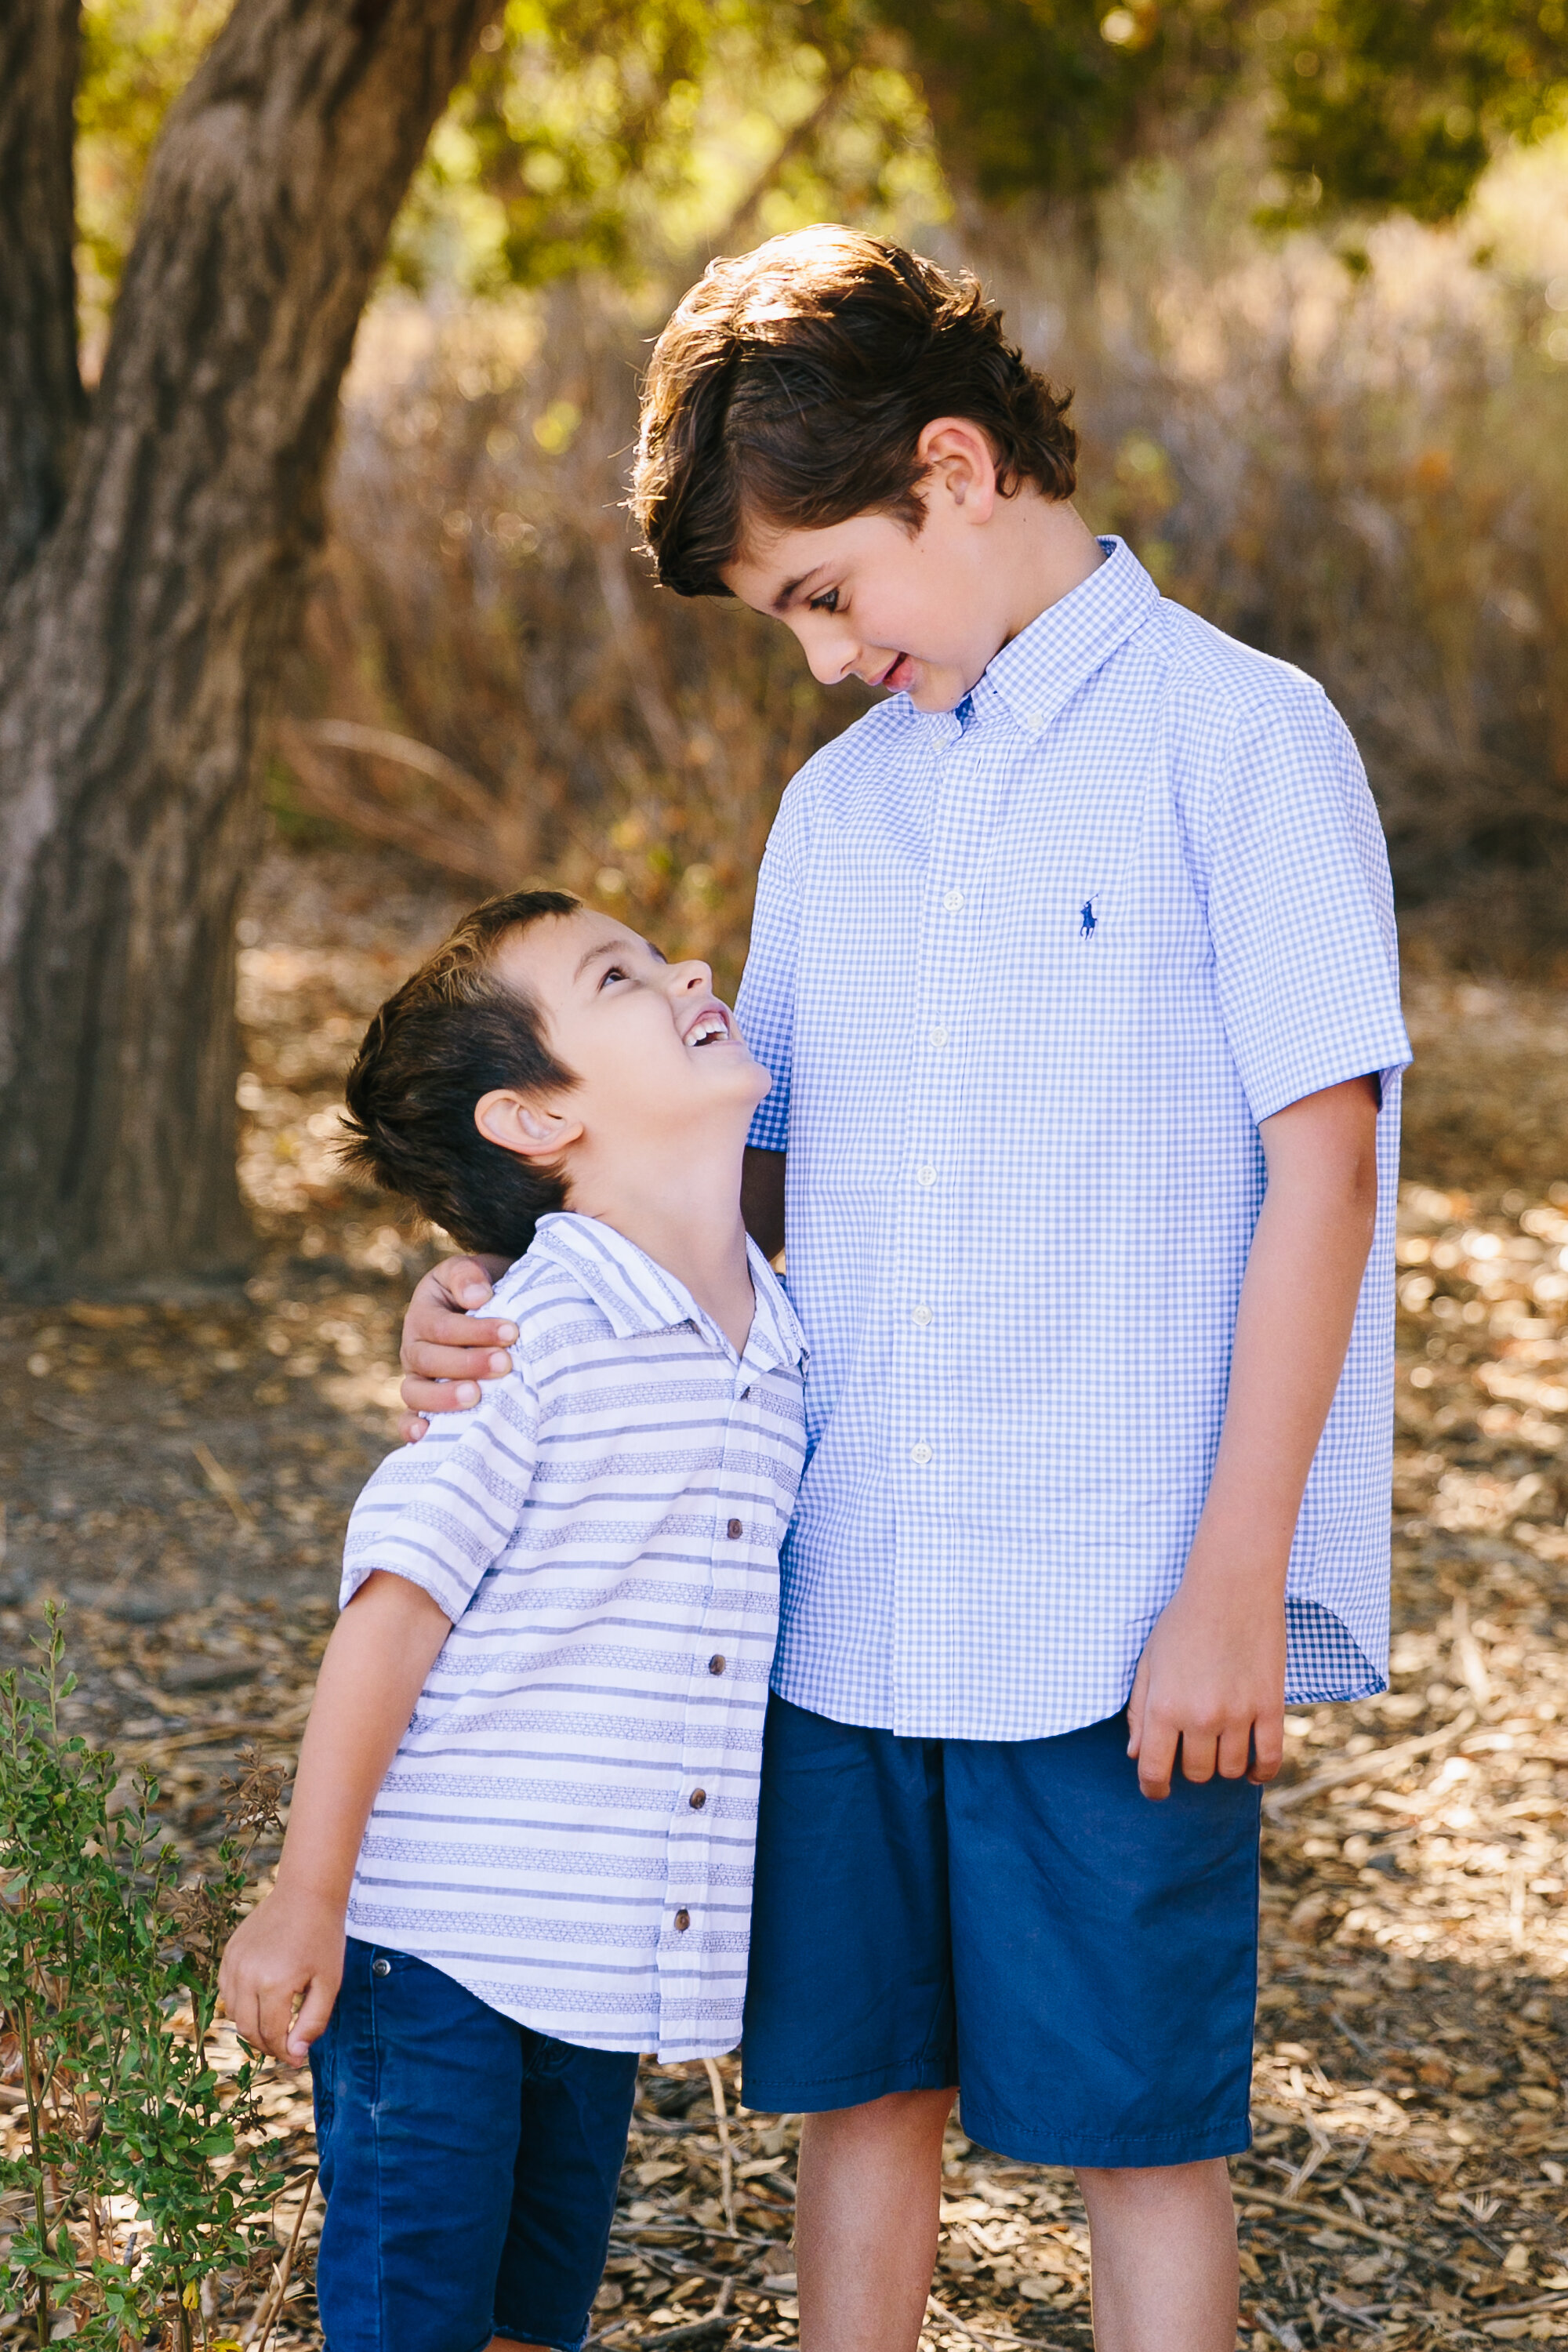 Los_Angeles_Family_Photography_Orange_County_Children_Babies_Field_Farm_Outdoors_Morning_Session_California_Girls_Boys_Kids_Photography-0595.jpg